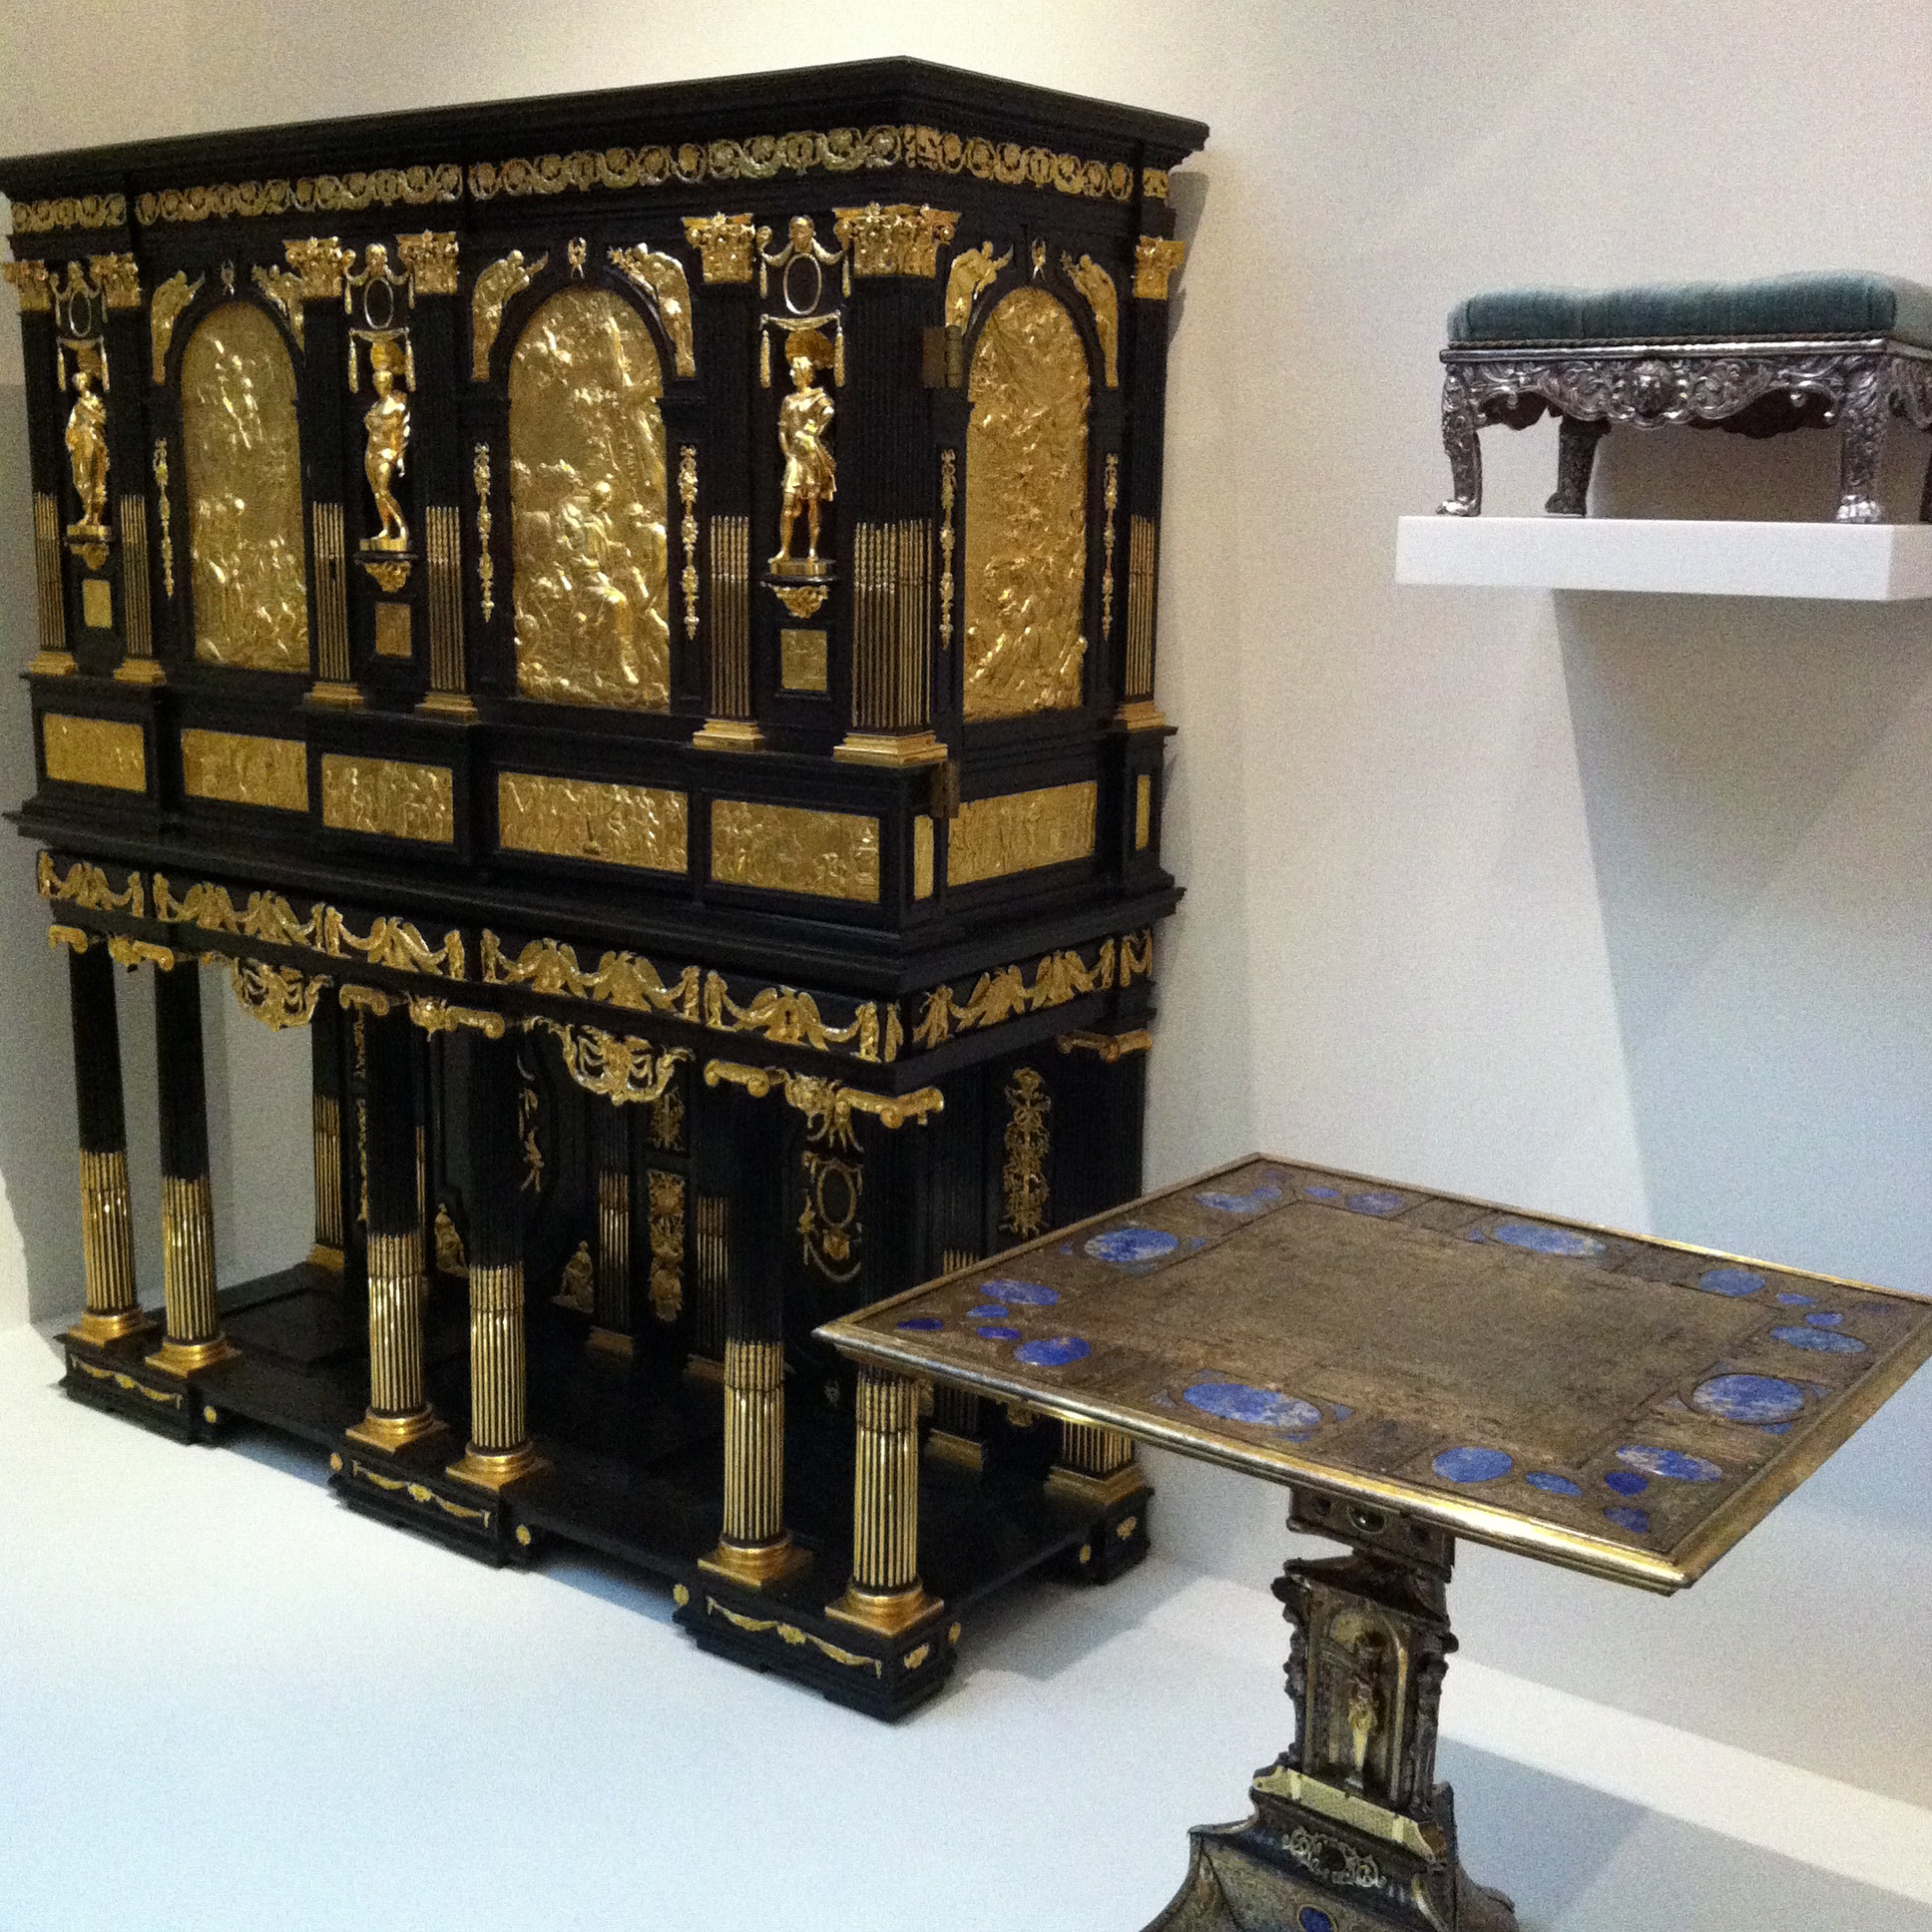 17th Century Parisian 'Marie de Medici' cabinet with ebony veneer and gilded brass plaques depicting scenes from a romantic poem